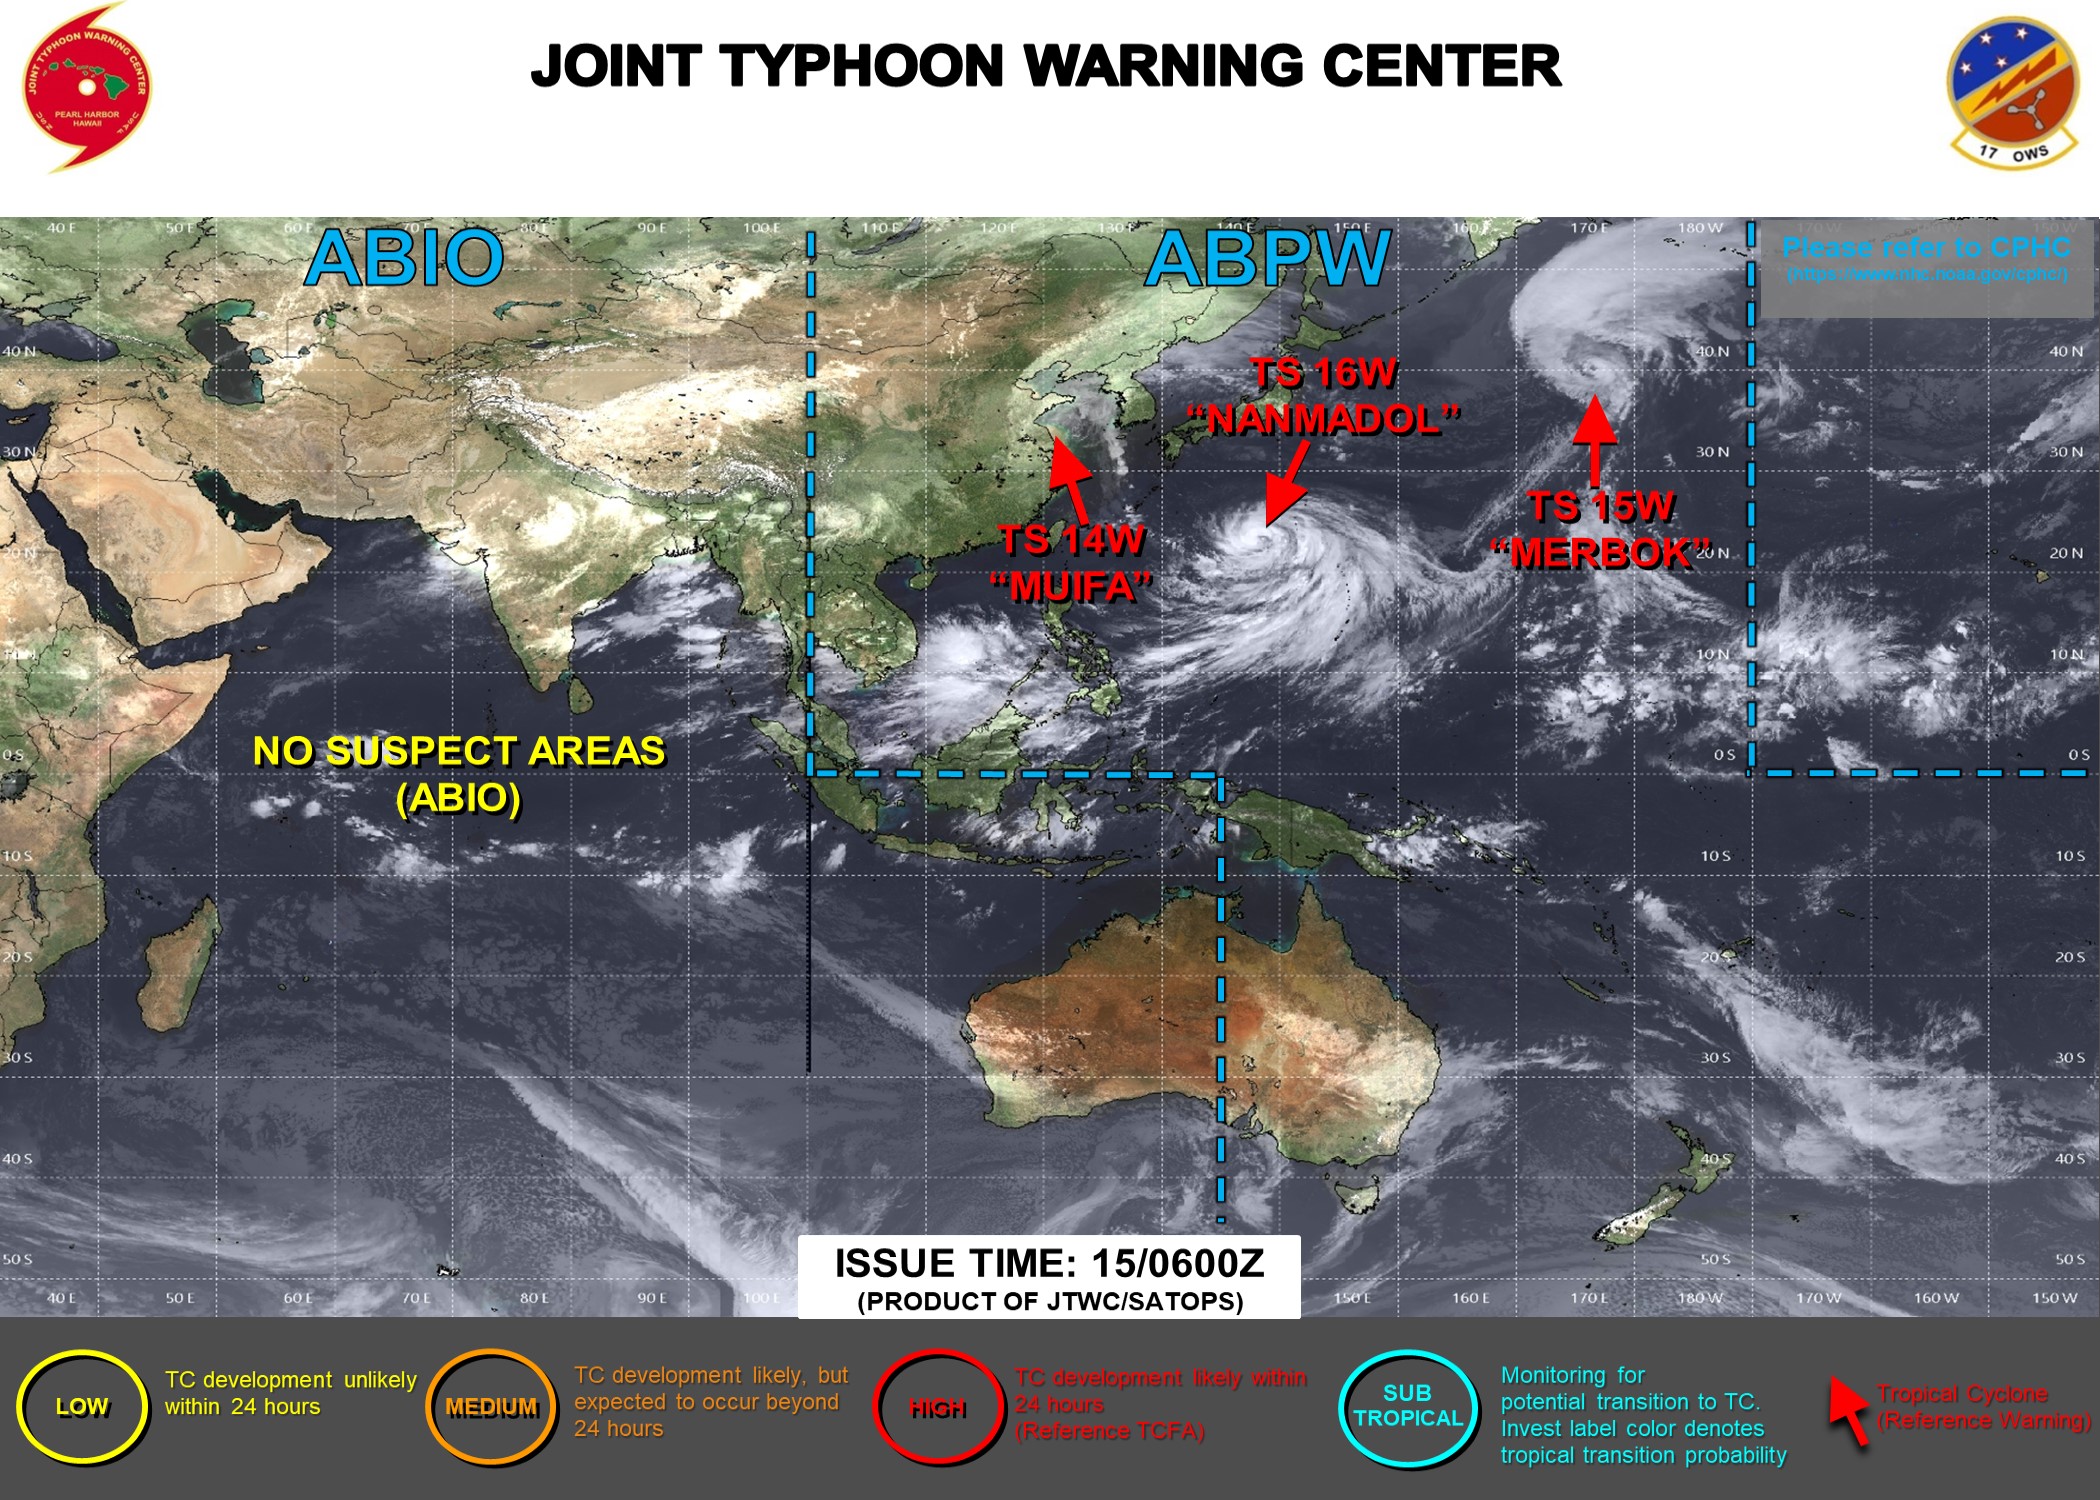 JTWC IS ISSUING 6HOURLY WARNINGS AND 3HOURLY SATELLITE BULLETINS ON 14W(MUIFA)AND 16W(NANMADOL). 3HOURLY SATELLITE BULLETINS ARE STILL ISSUED ON 15W(MERBOK).